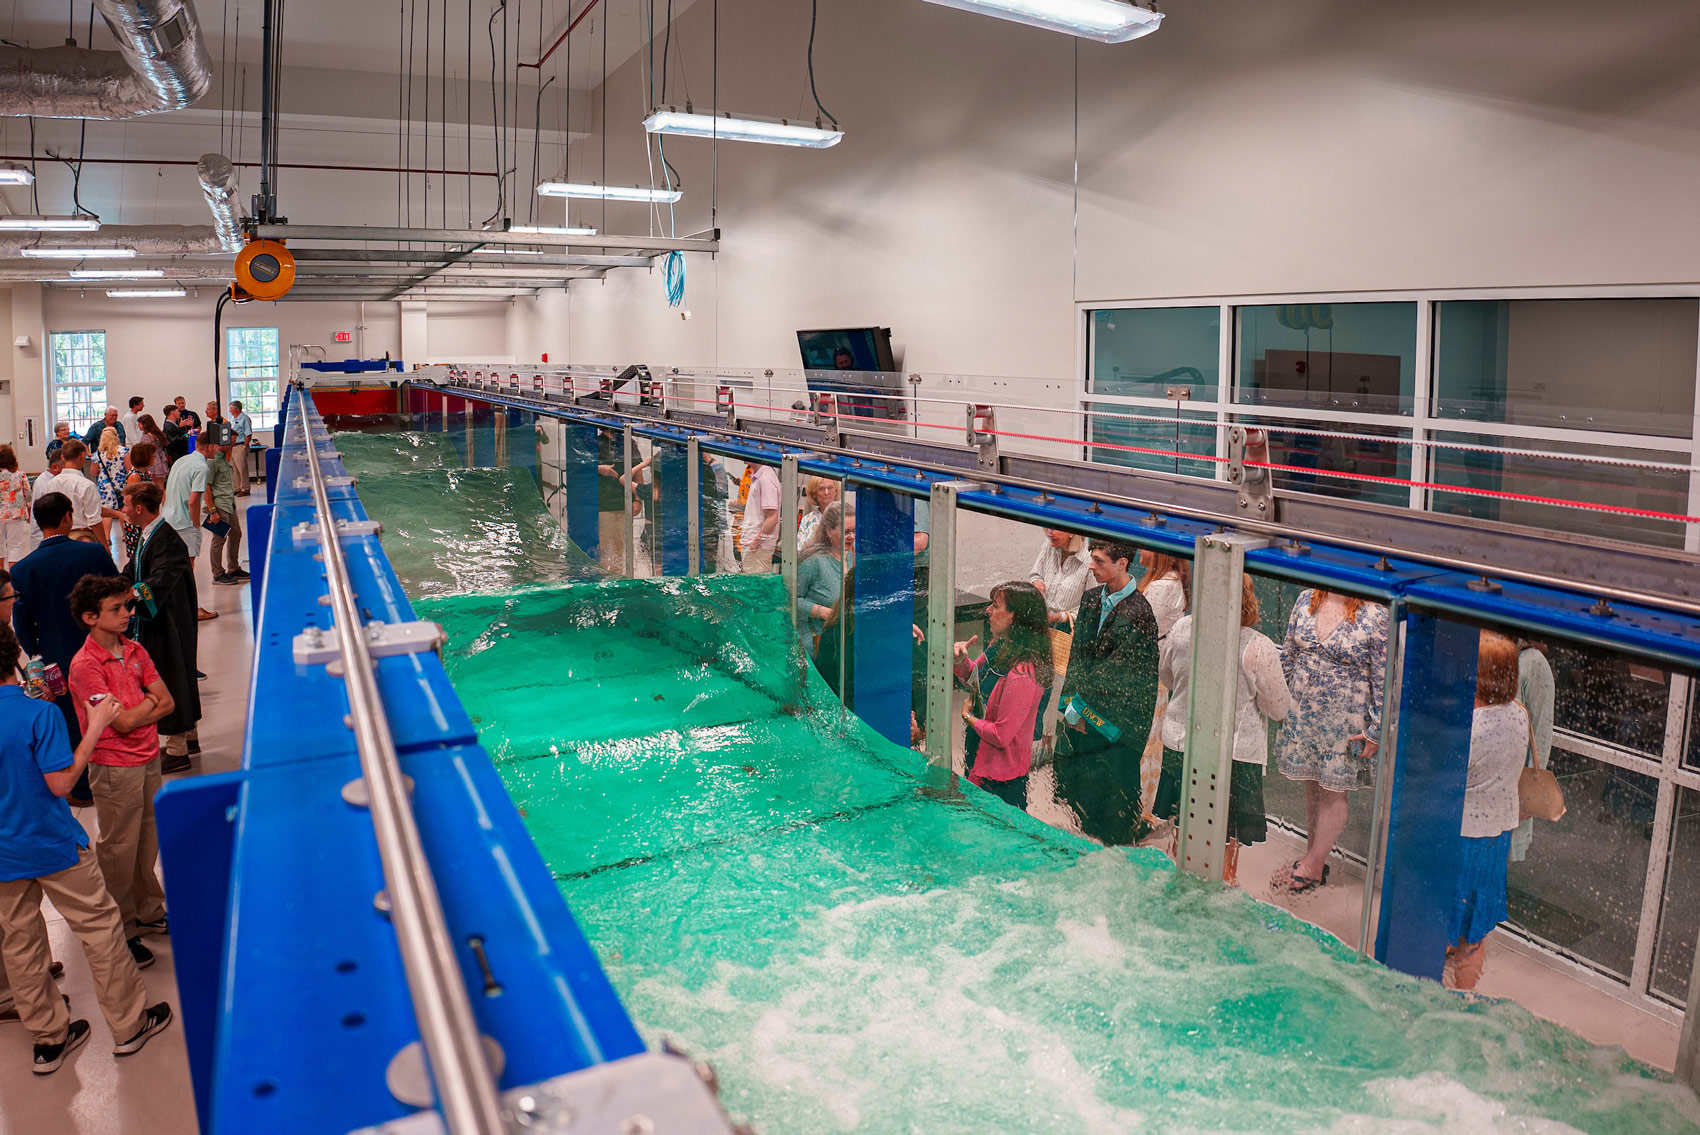 Spanning nearly 80 feet long and 5 feet wide, our state-of-the-art wave flume holds 9,500 gallons of water and allows students and faculty to study ocean waves.